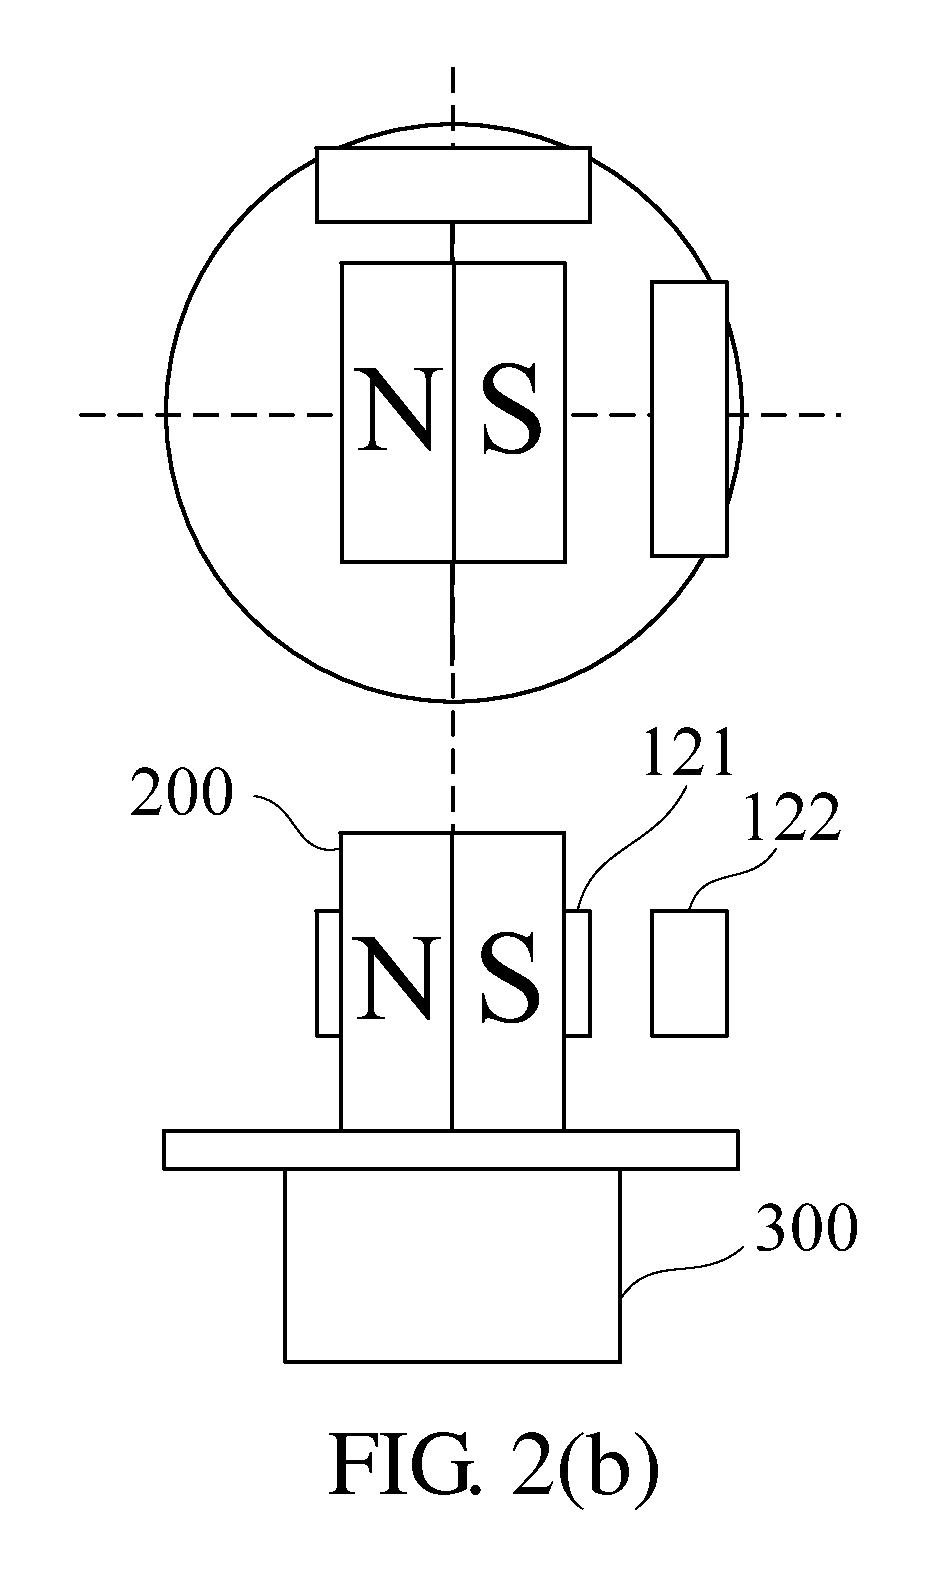 Non-contact adjustable hysteretic magnetic encoder